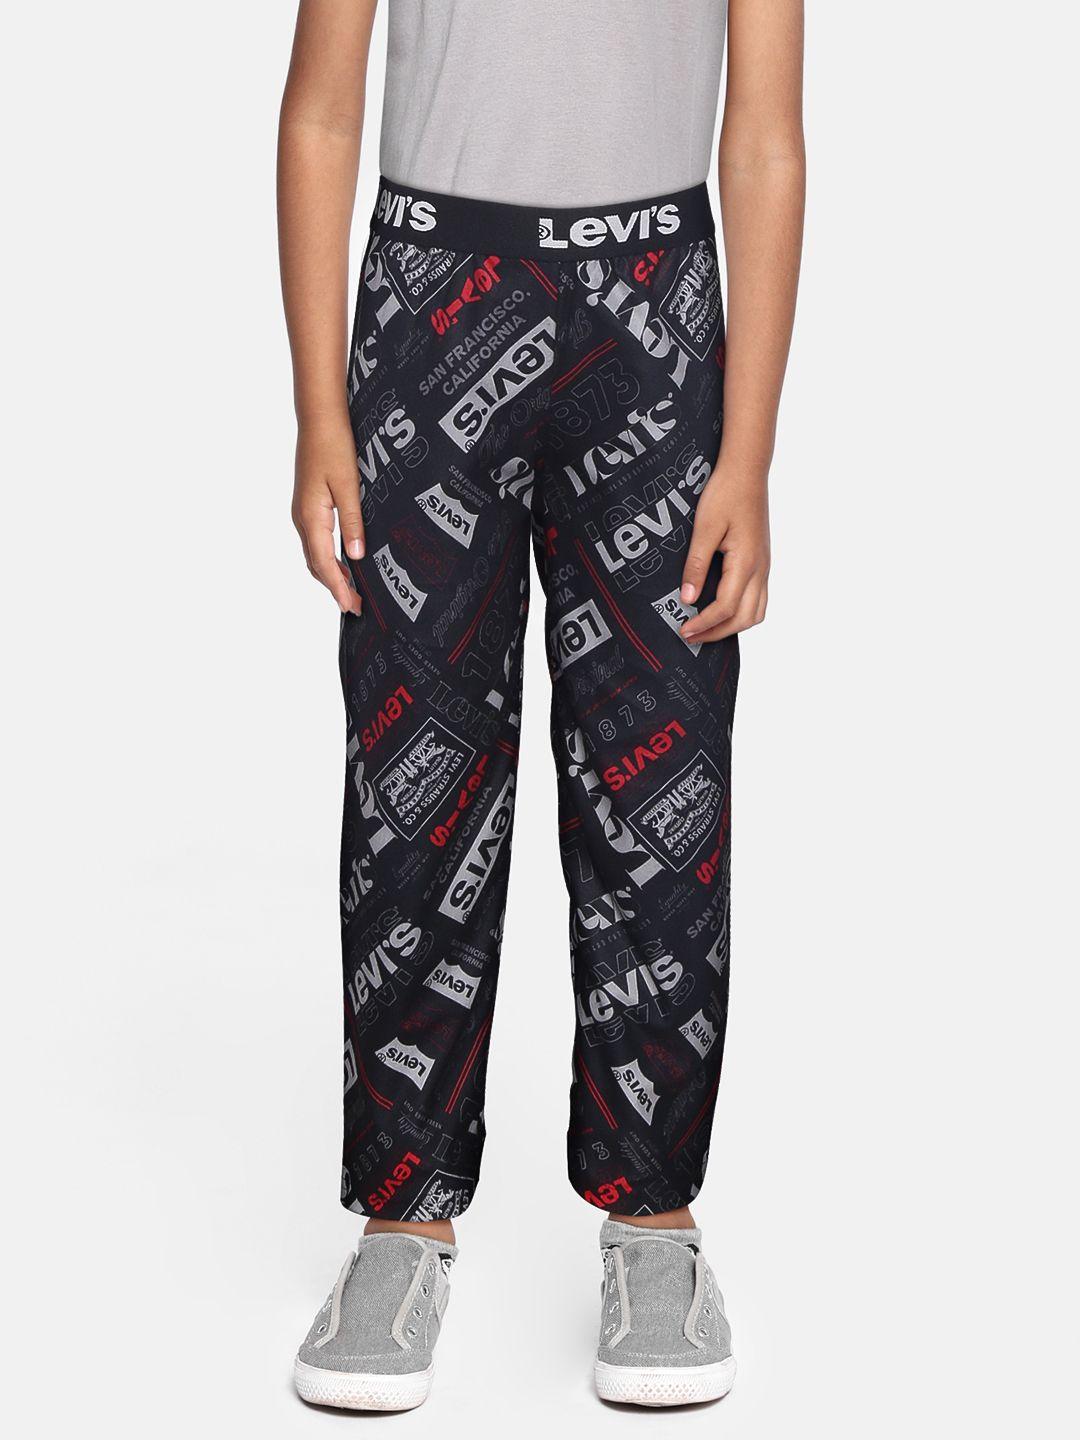 levis-boys-charcoal-grey-brand-logo-printed-relaxed-fit-lounge-pants